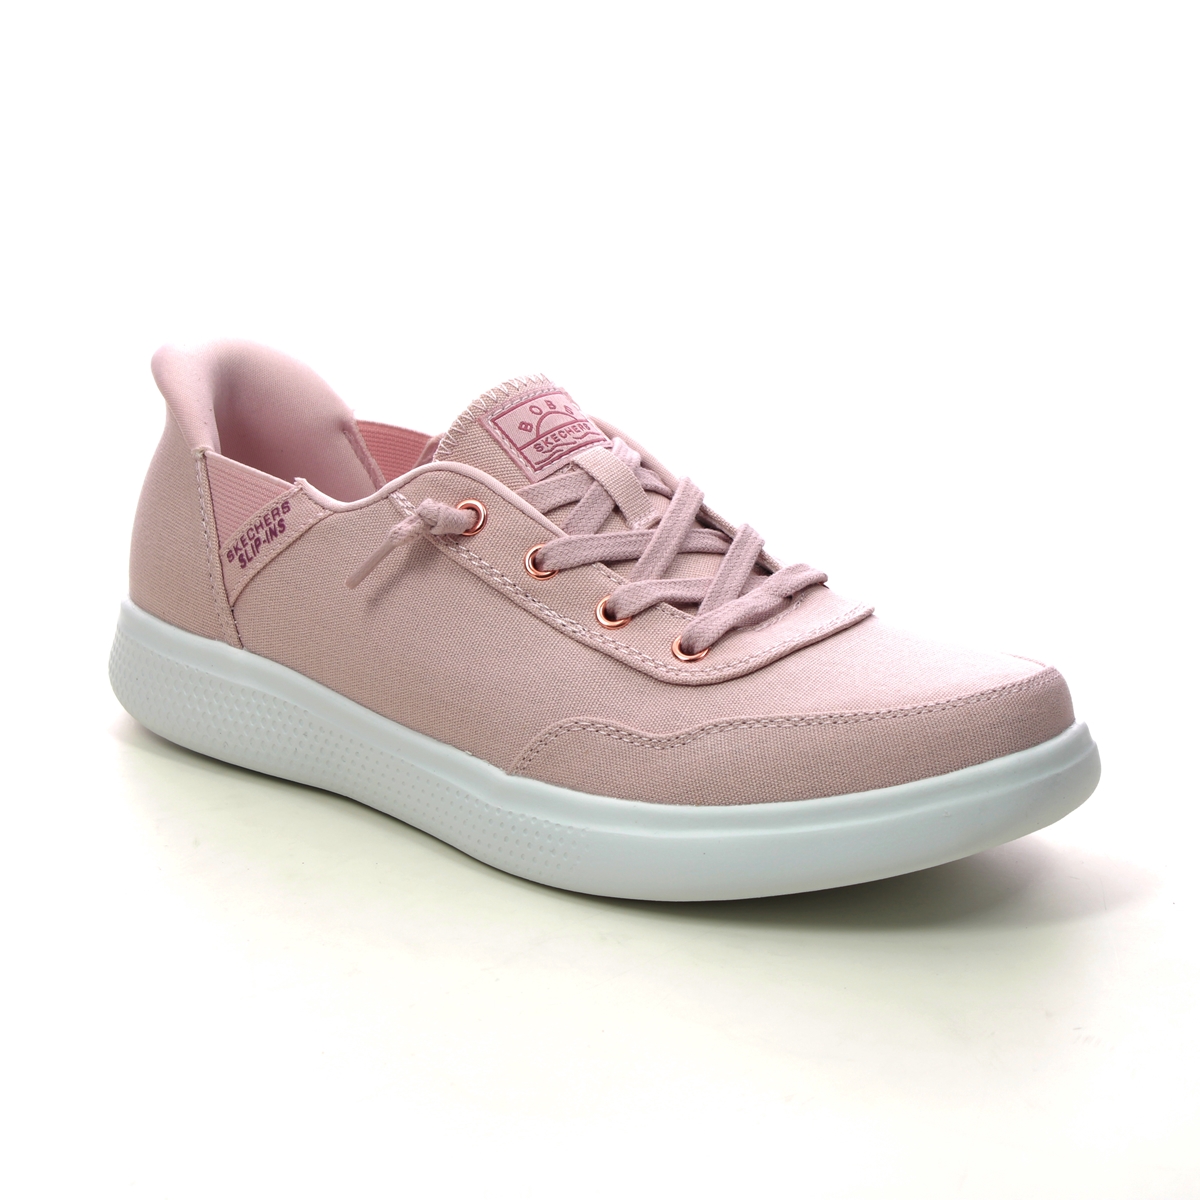 Skechers Bobs Slip Ins BLSH Blush Pink Womens trainers 114815 in a Plain Textile in Size 4